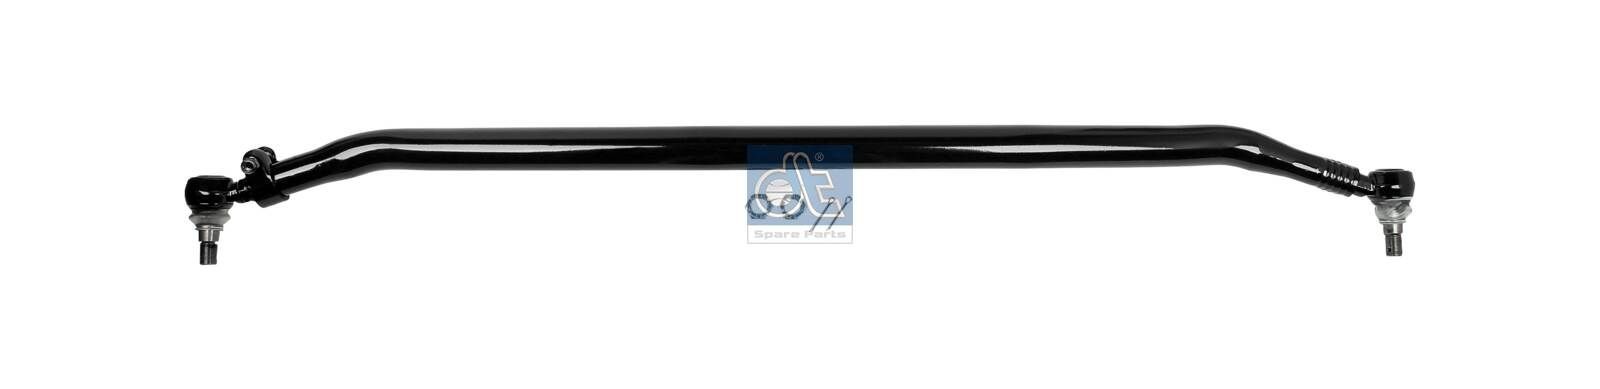 DT Spare Parts 2.53046 Rod Assembly 21 106 938